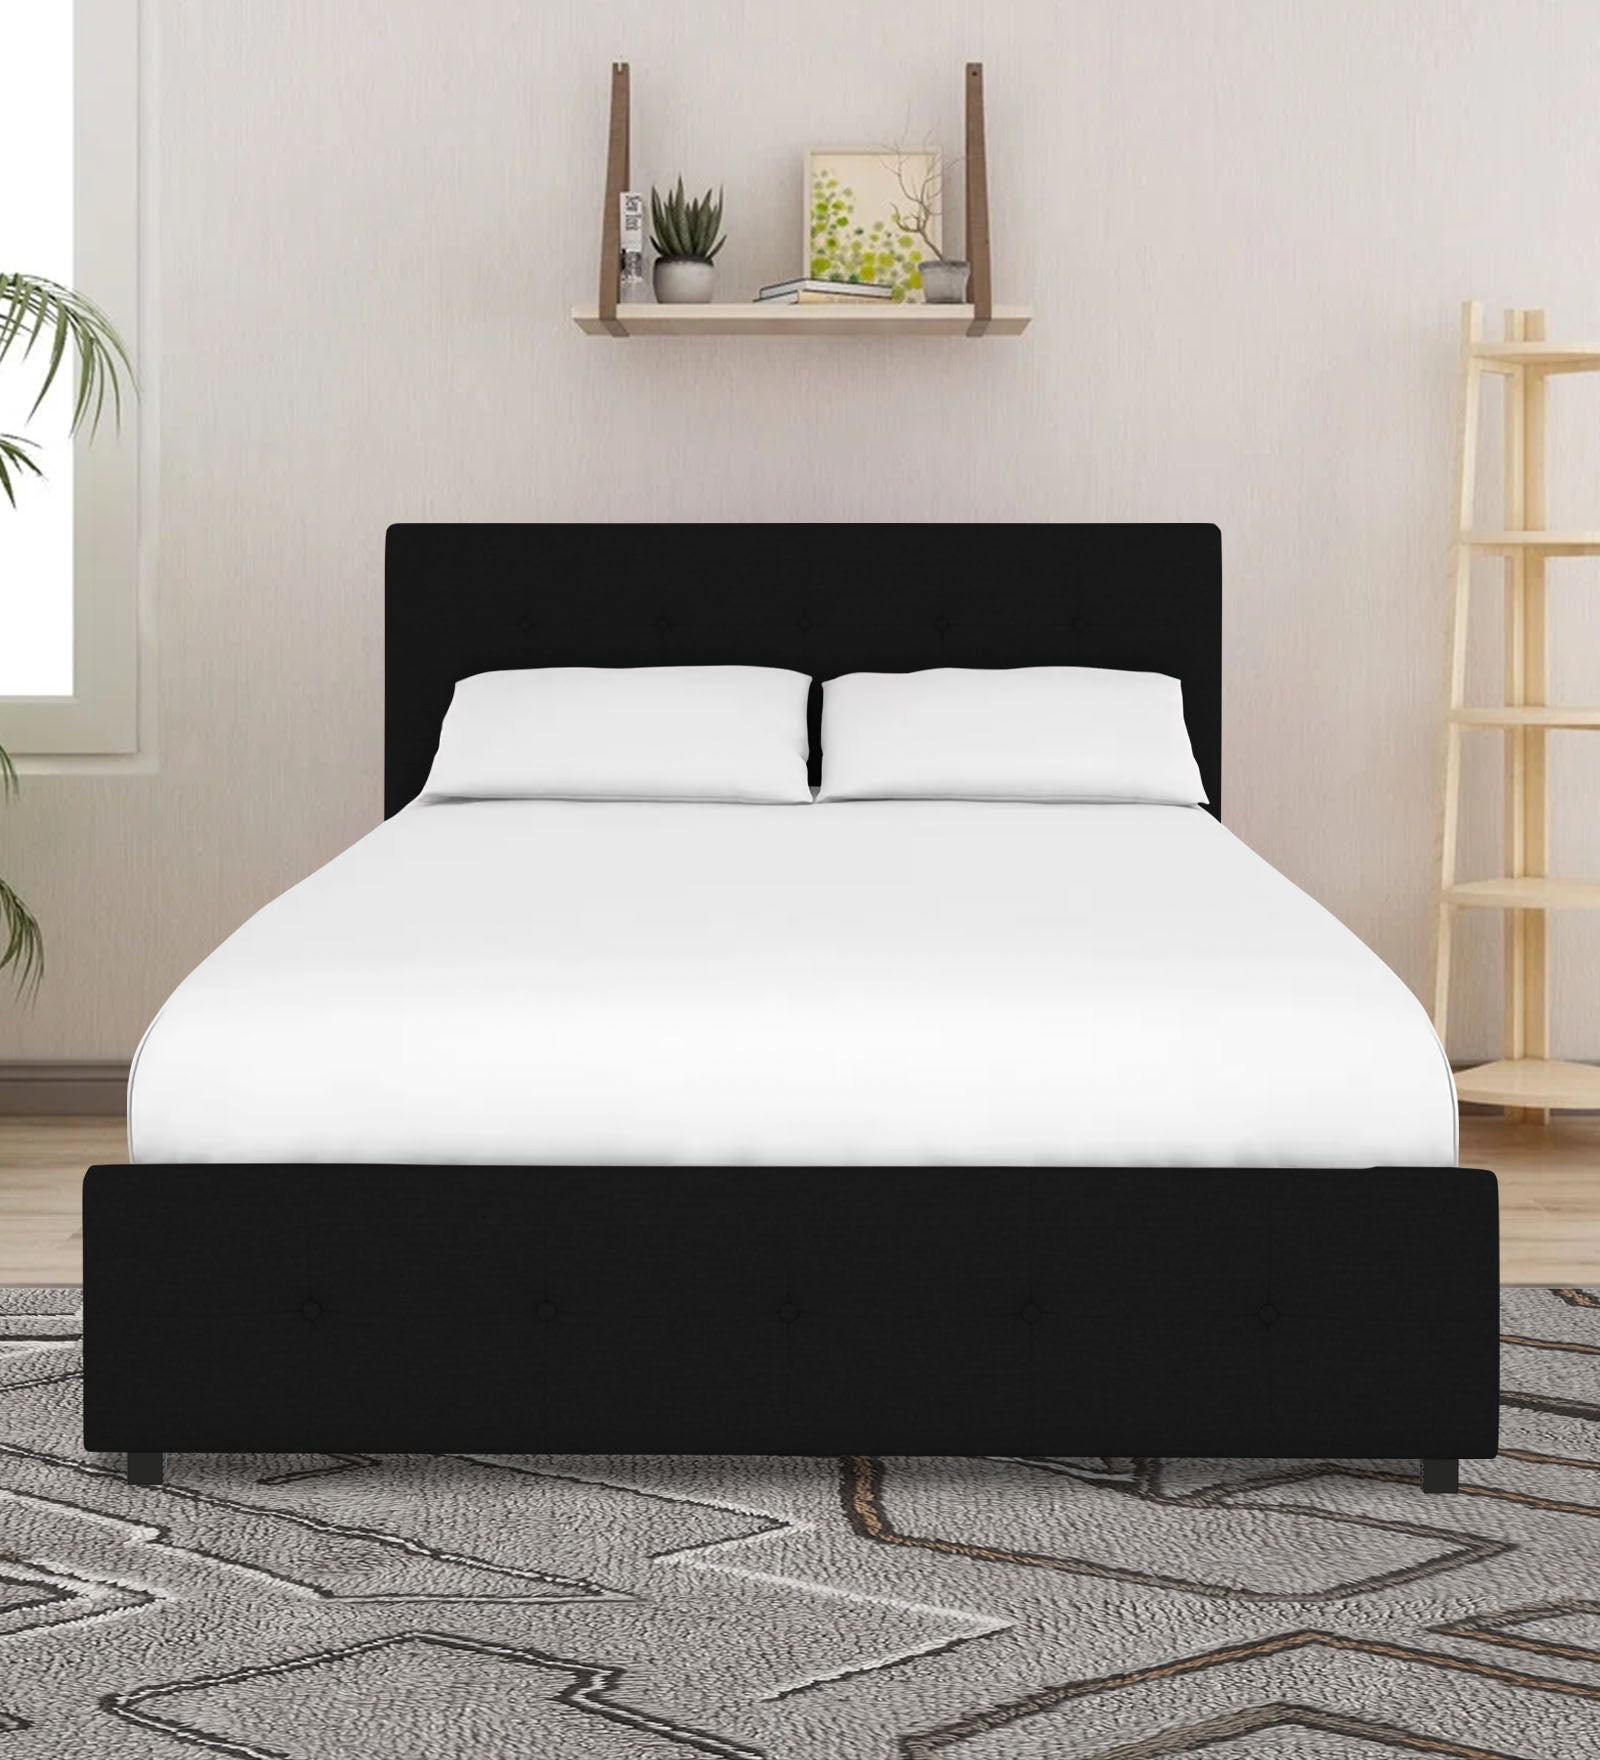 Lido Fabric Queen Size Bed In Zed Black Colour With Storage